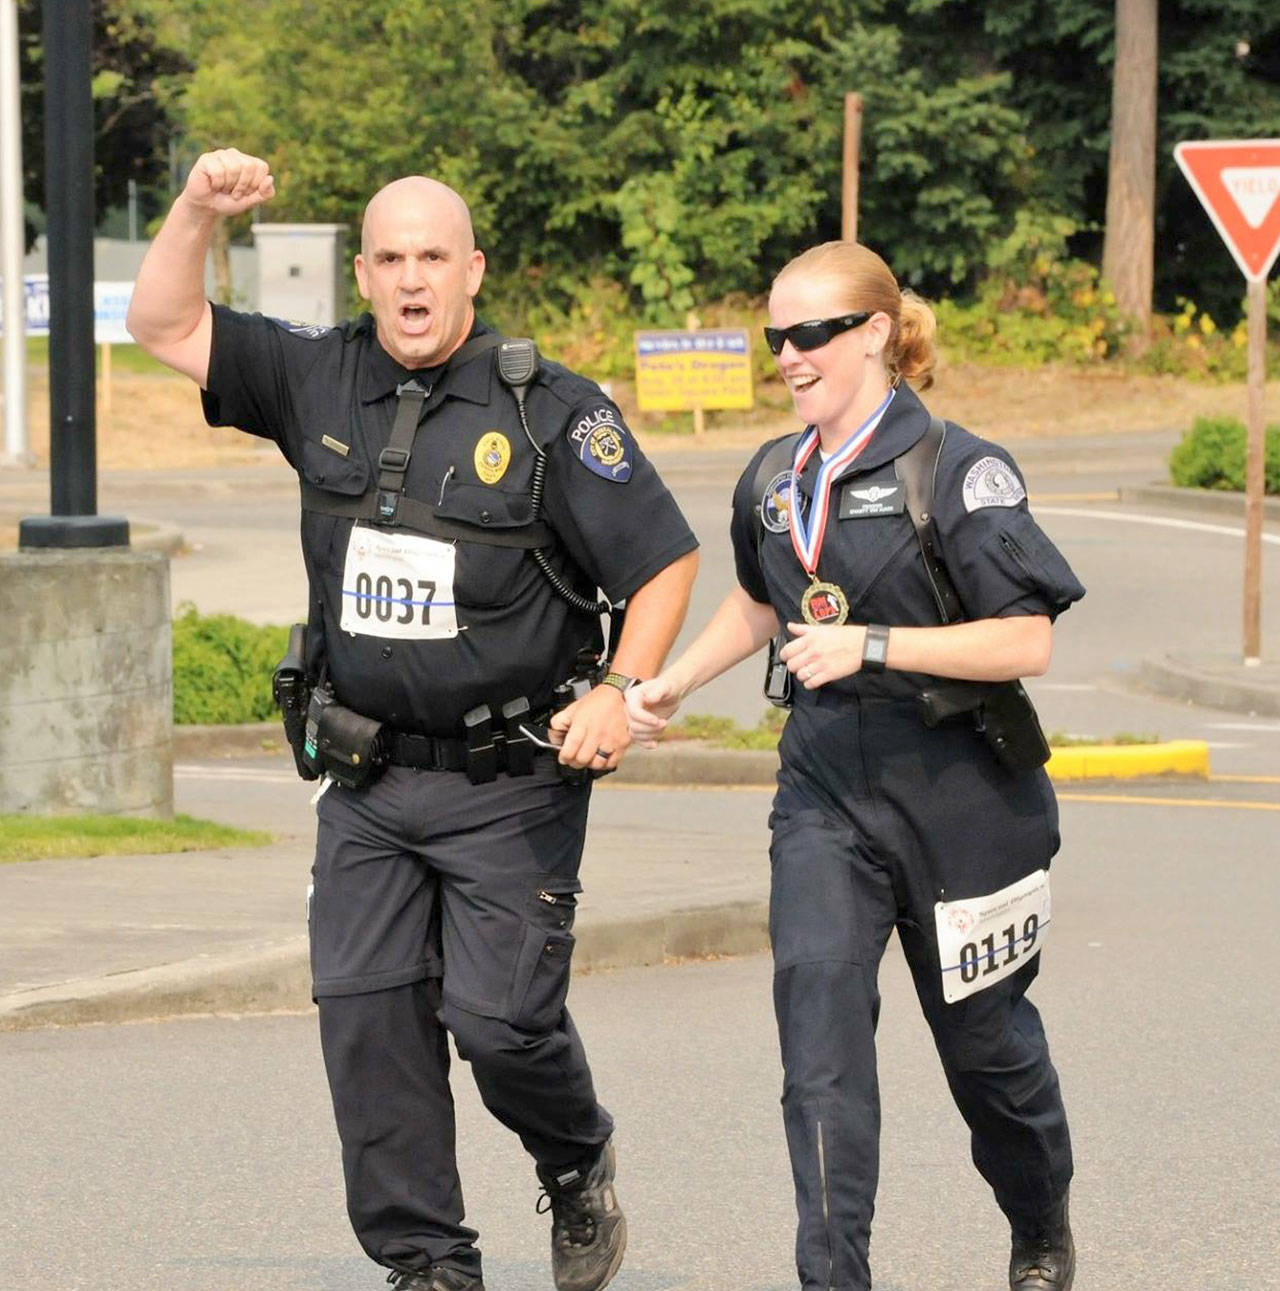 Officer Donovan Heavener, left, runs in the first annual Run with a Cop event last year. Donovan started up the event, which raises money for Special Olympics, after returning to the Federal Way Police Department in August 2016. Courtesy Shelley Pauls